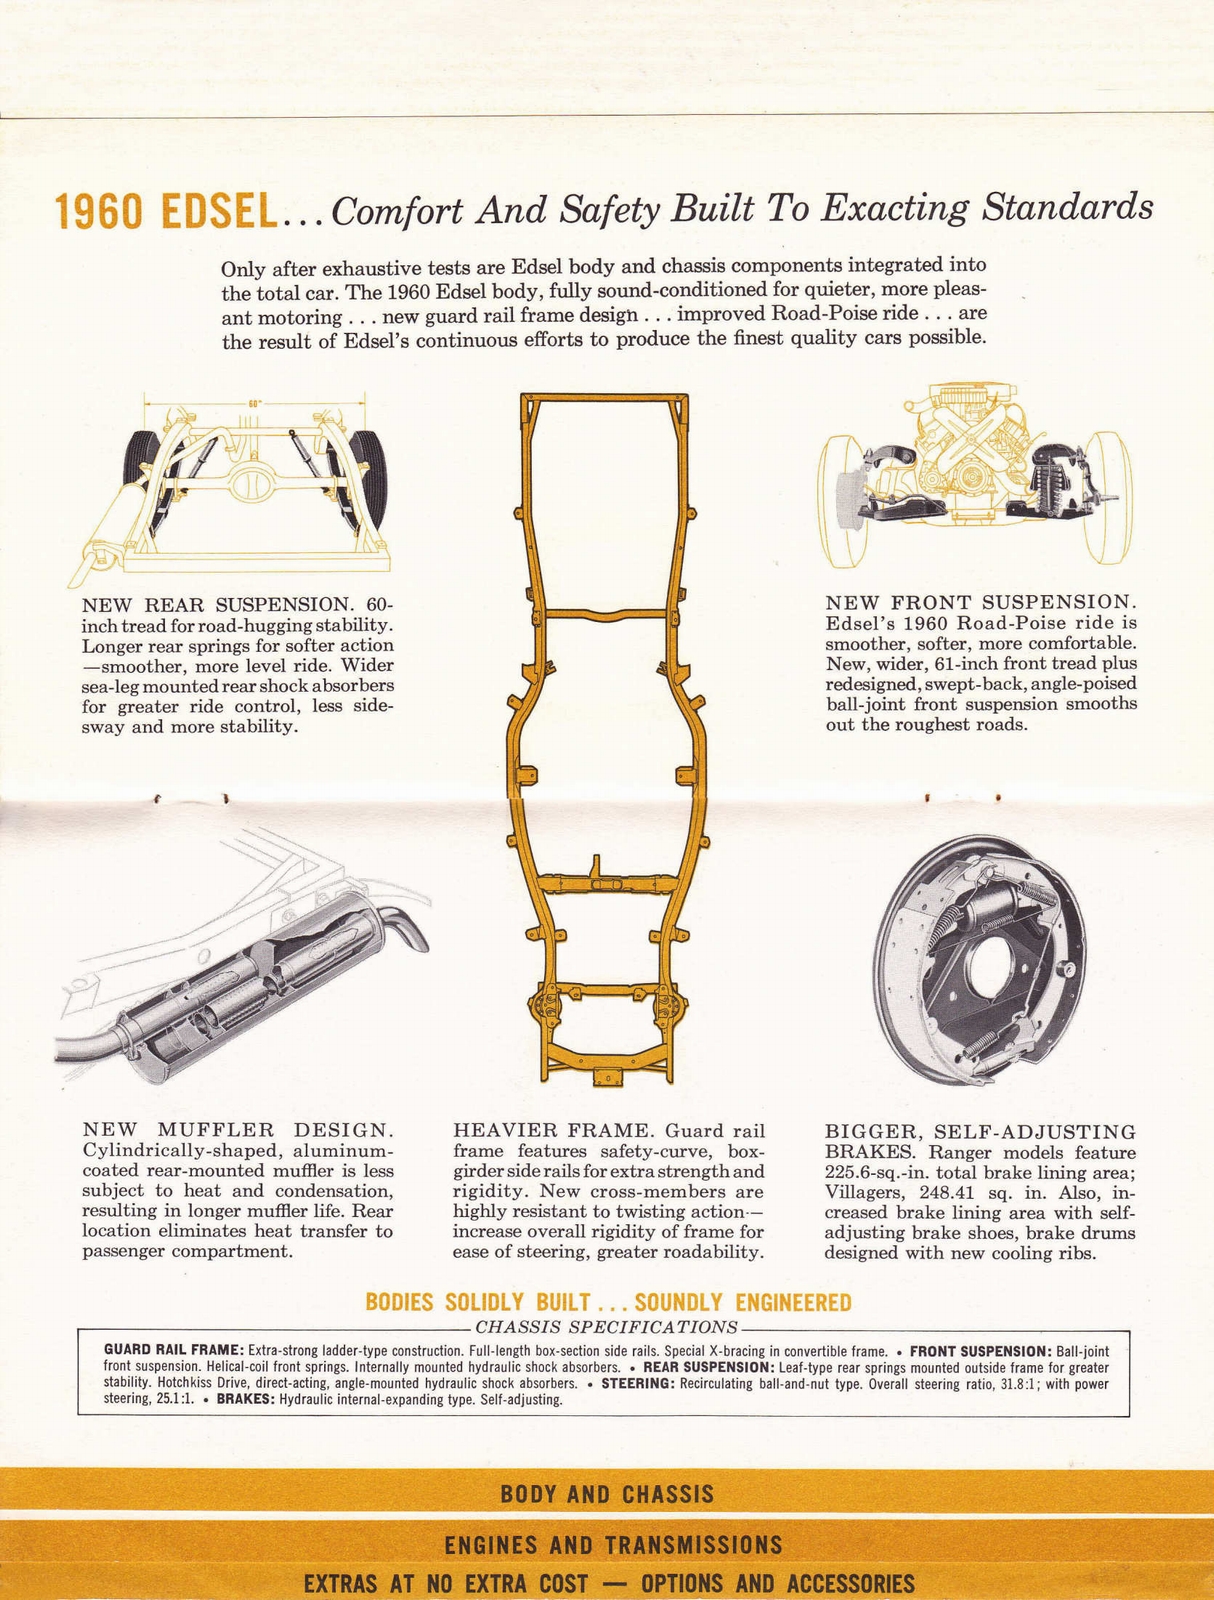 n_1960 Edsel Quick Facts Booklet-10-11.jpg